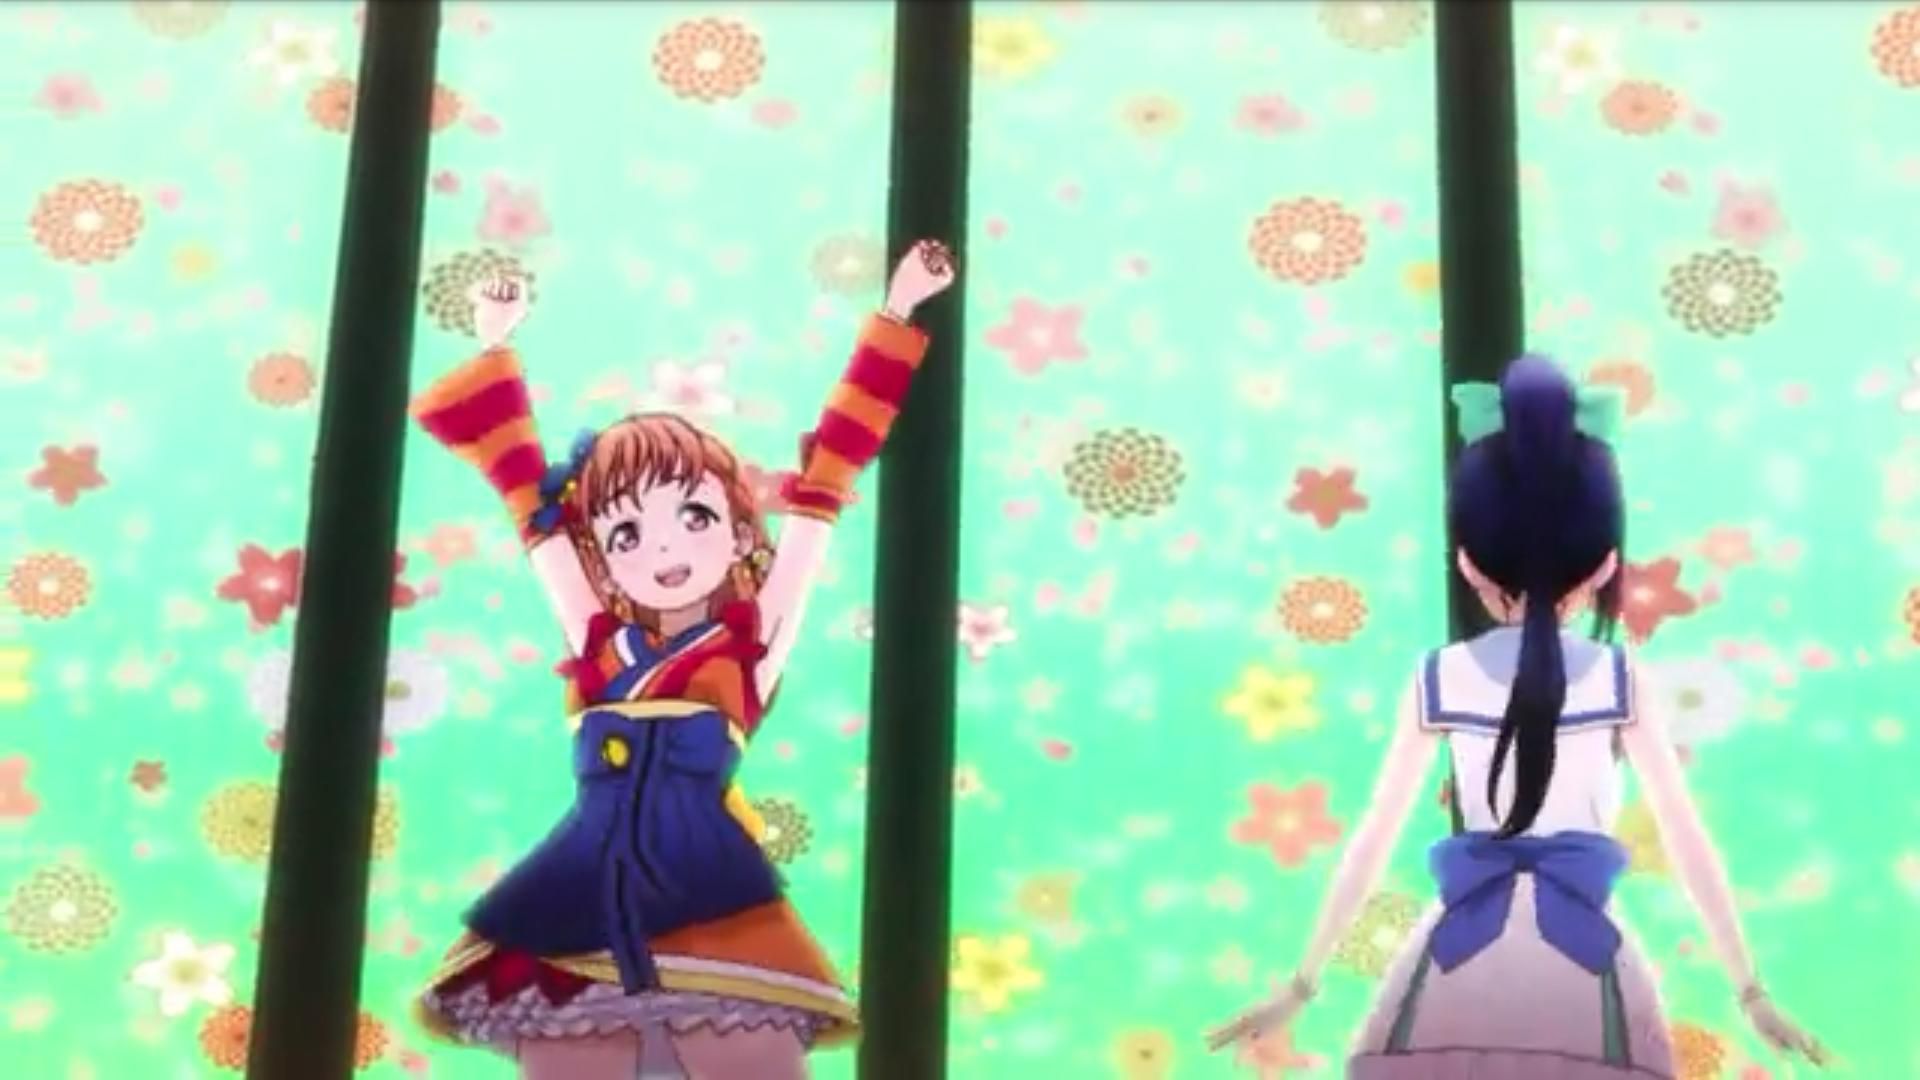 [Image] "love live! Sunshine "1000 songs she bend was its cute scene image competitions wwwwwwwwww 14